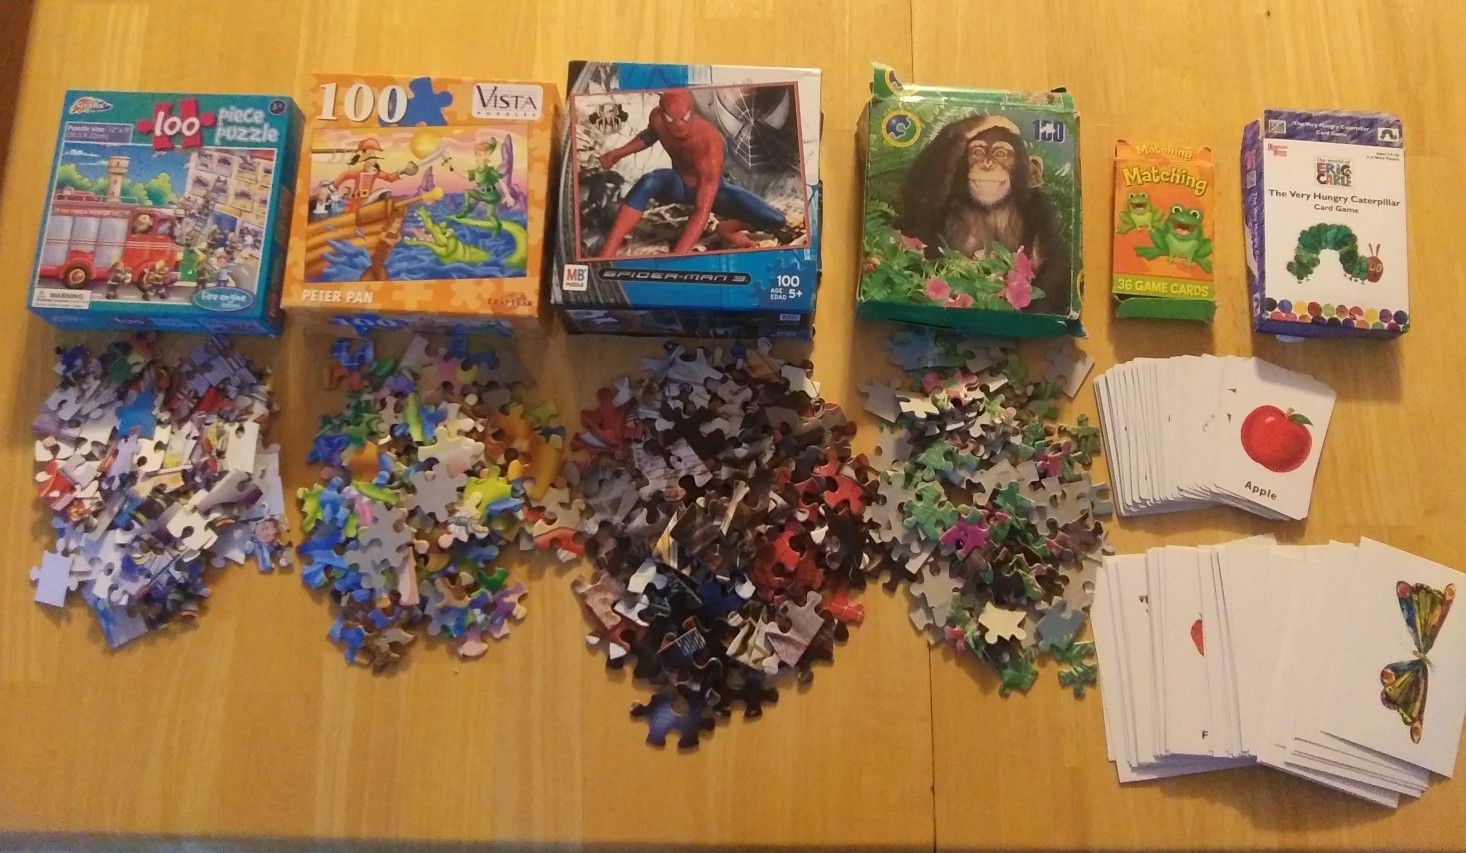 5 puzzles ( 1 not in pic) Matching Game, & Hungry Caterpillar Game